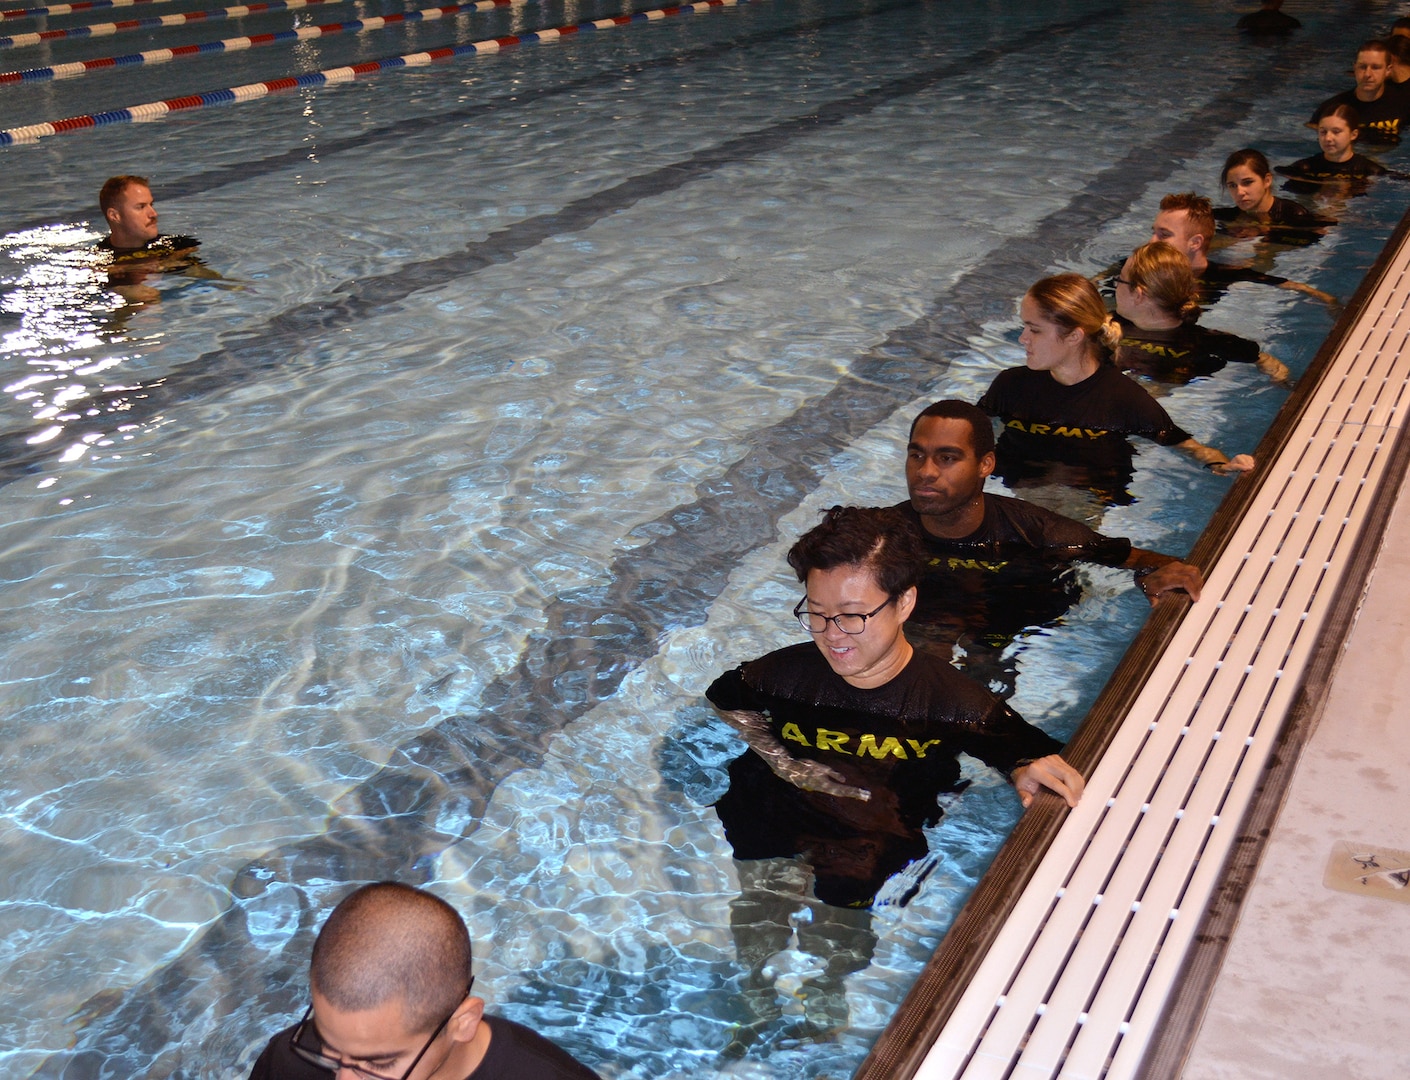 Army Staff Sgt. Timothy S. McCoole (left), a Drill Sergeant with the Gladiator program at Joint Base San Antonio-Fort Sam Houston, leads a group of Soldier medics in training through morning exercises at the JBSA-Fort Sam Houston aquatic center.